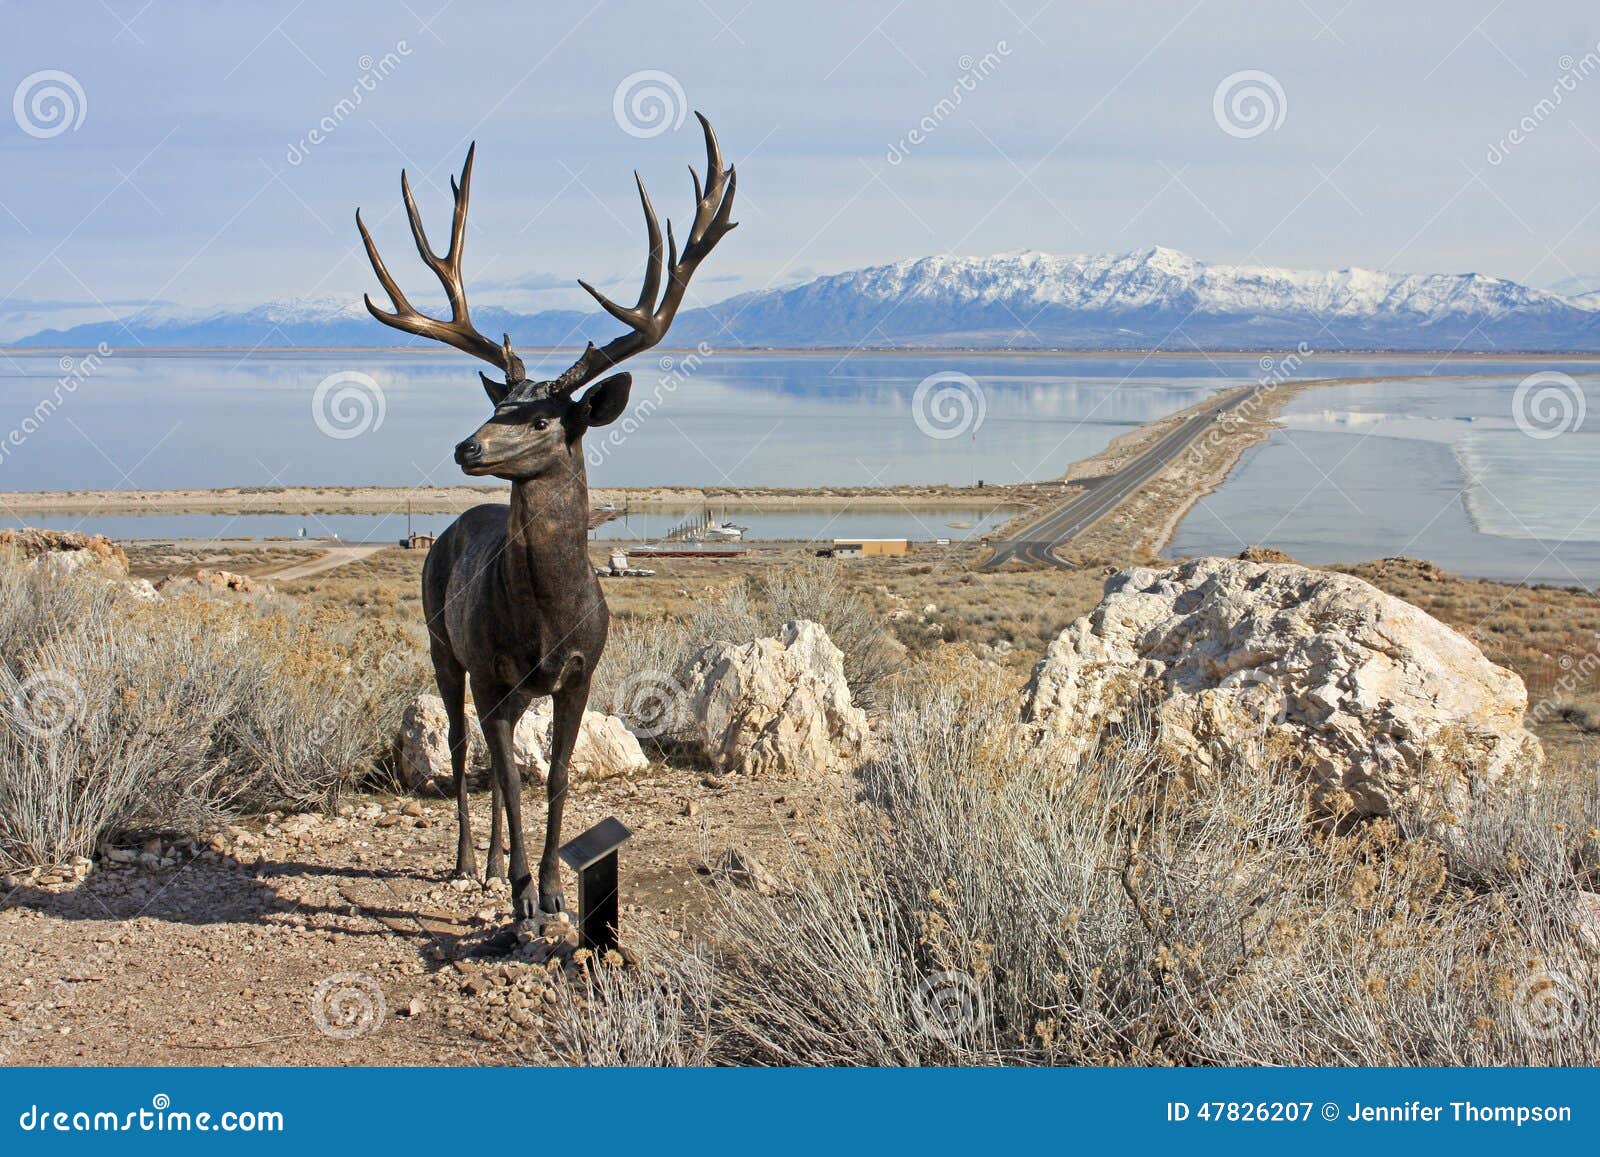 are dogs allowed on antelope island